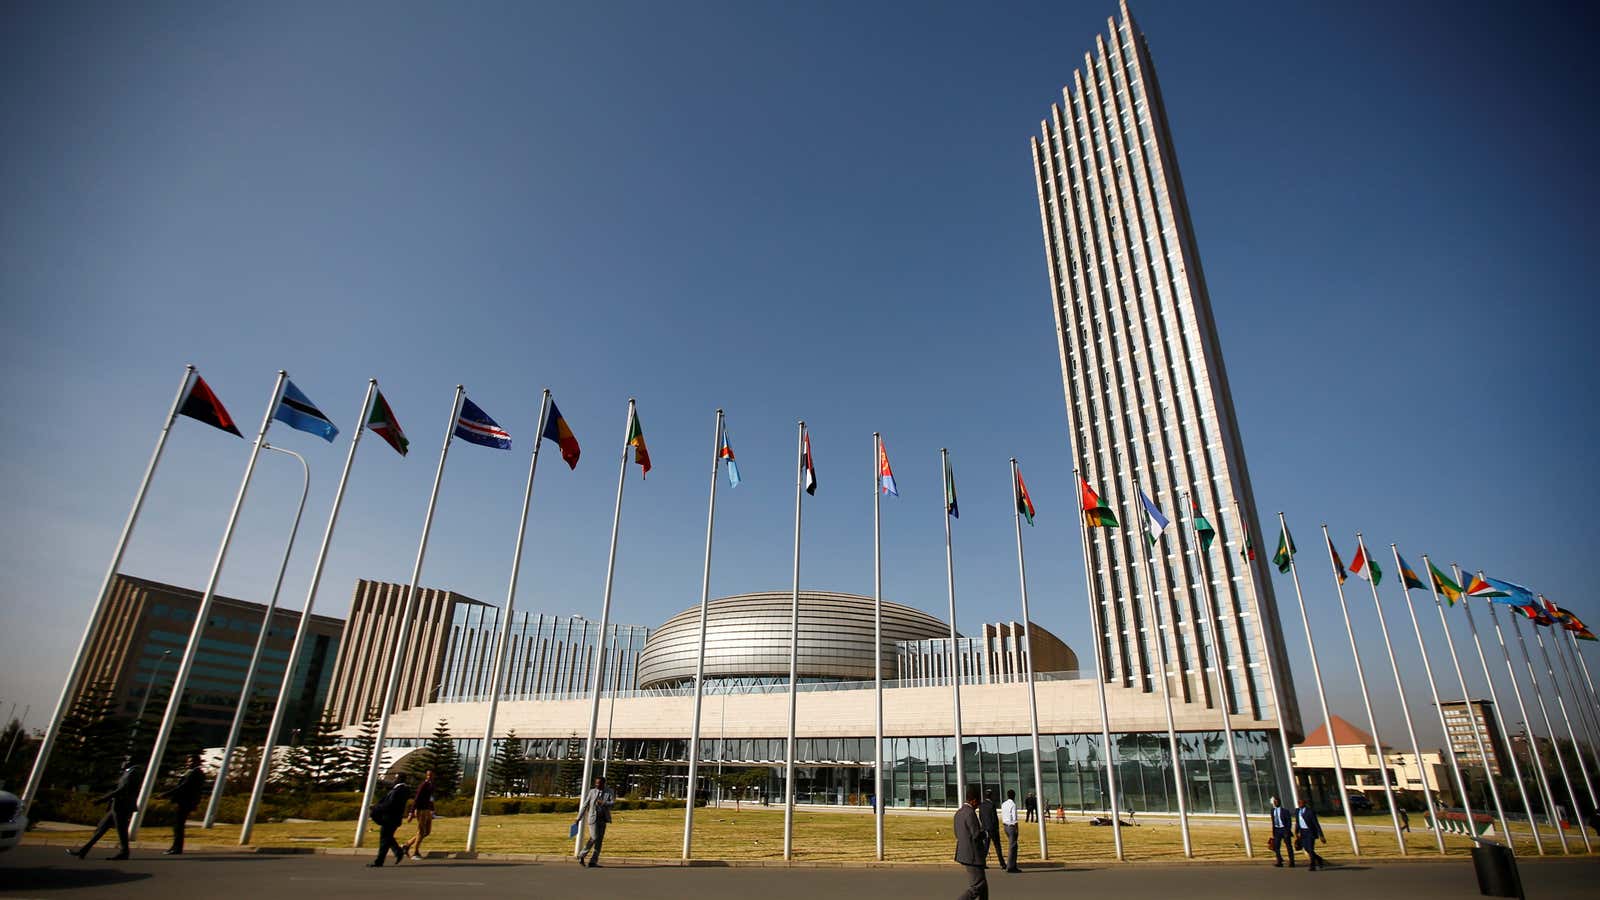 The headquarters of the African Union (AU) building in Ethiopia’s capital Addis Ababa